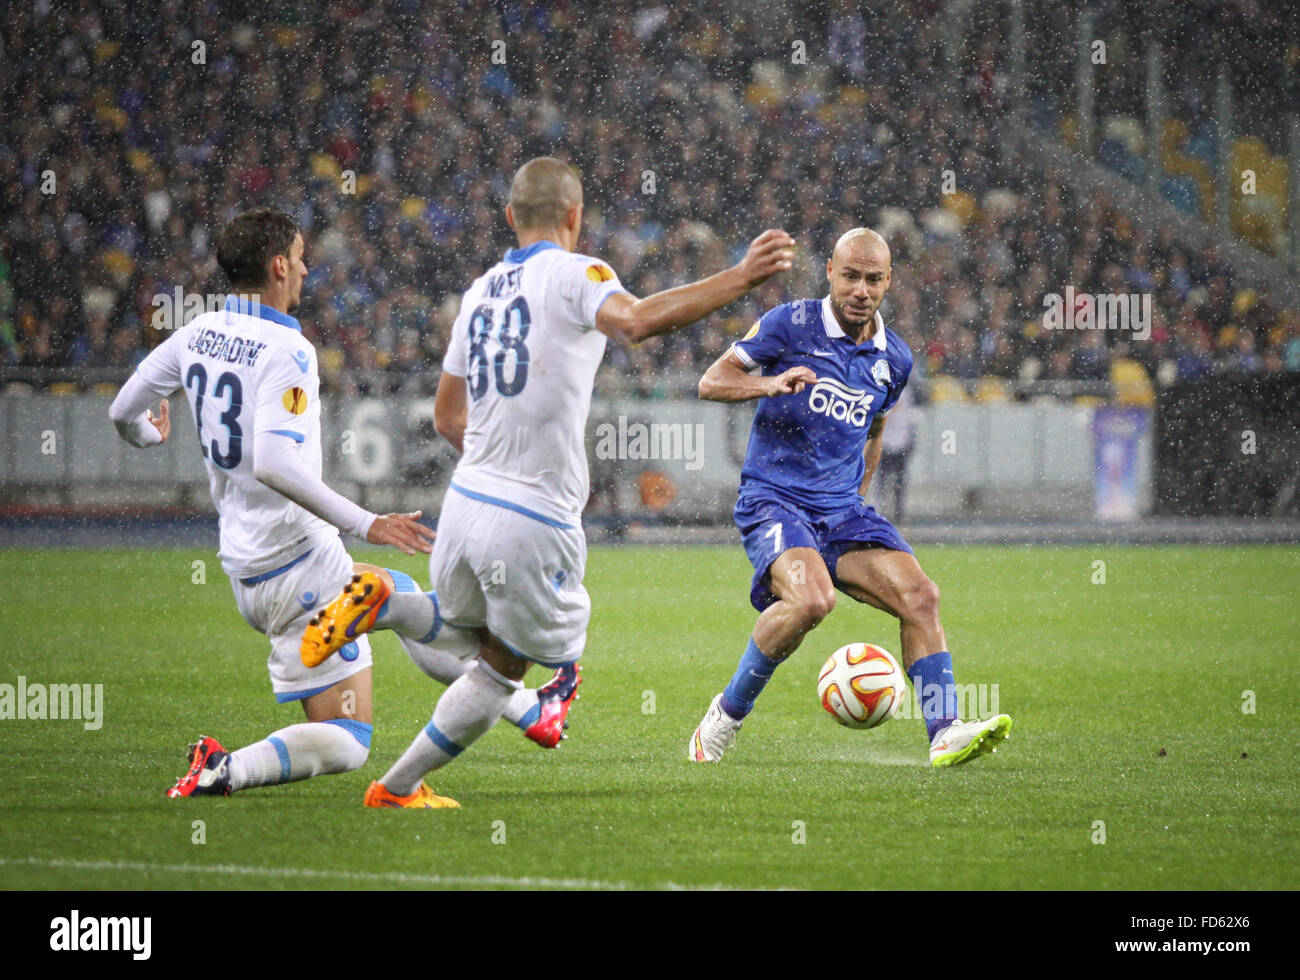 KYIV, UKRAINE - MAY 14, 2015: Jaba Kankava of FC Dnipro (R) fights for a ball with Manolo Gabbiadini (L) and Gokhan Inler of SSC Napoli during their UEFA Europa League semifinal game Stock Photo